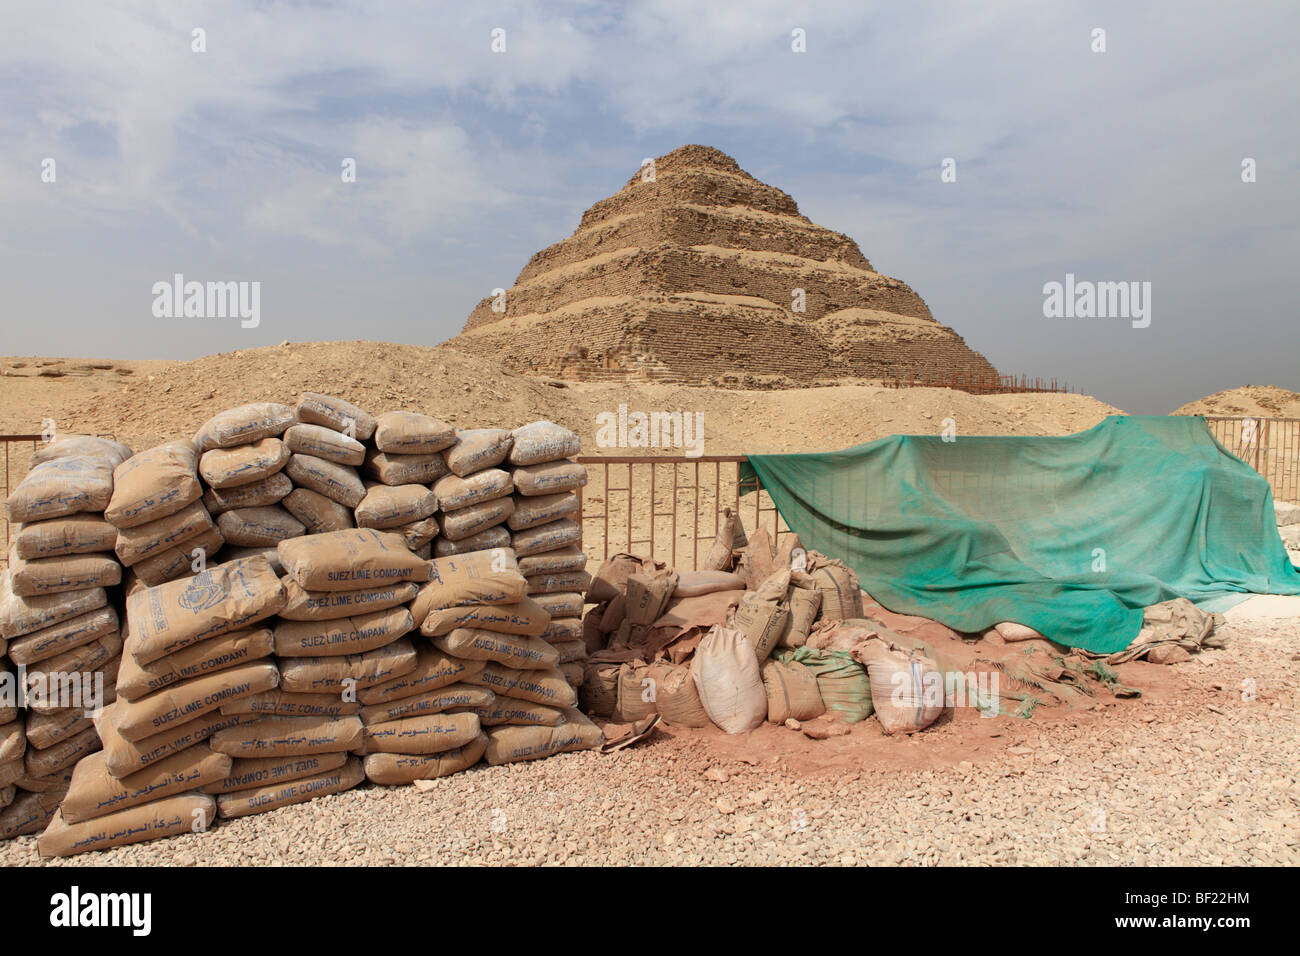 The stepped pyramid of Zoser with sacks of construction material used in restoration - Saqqara, Egypt. Stock Photo